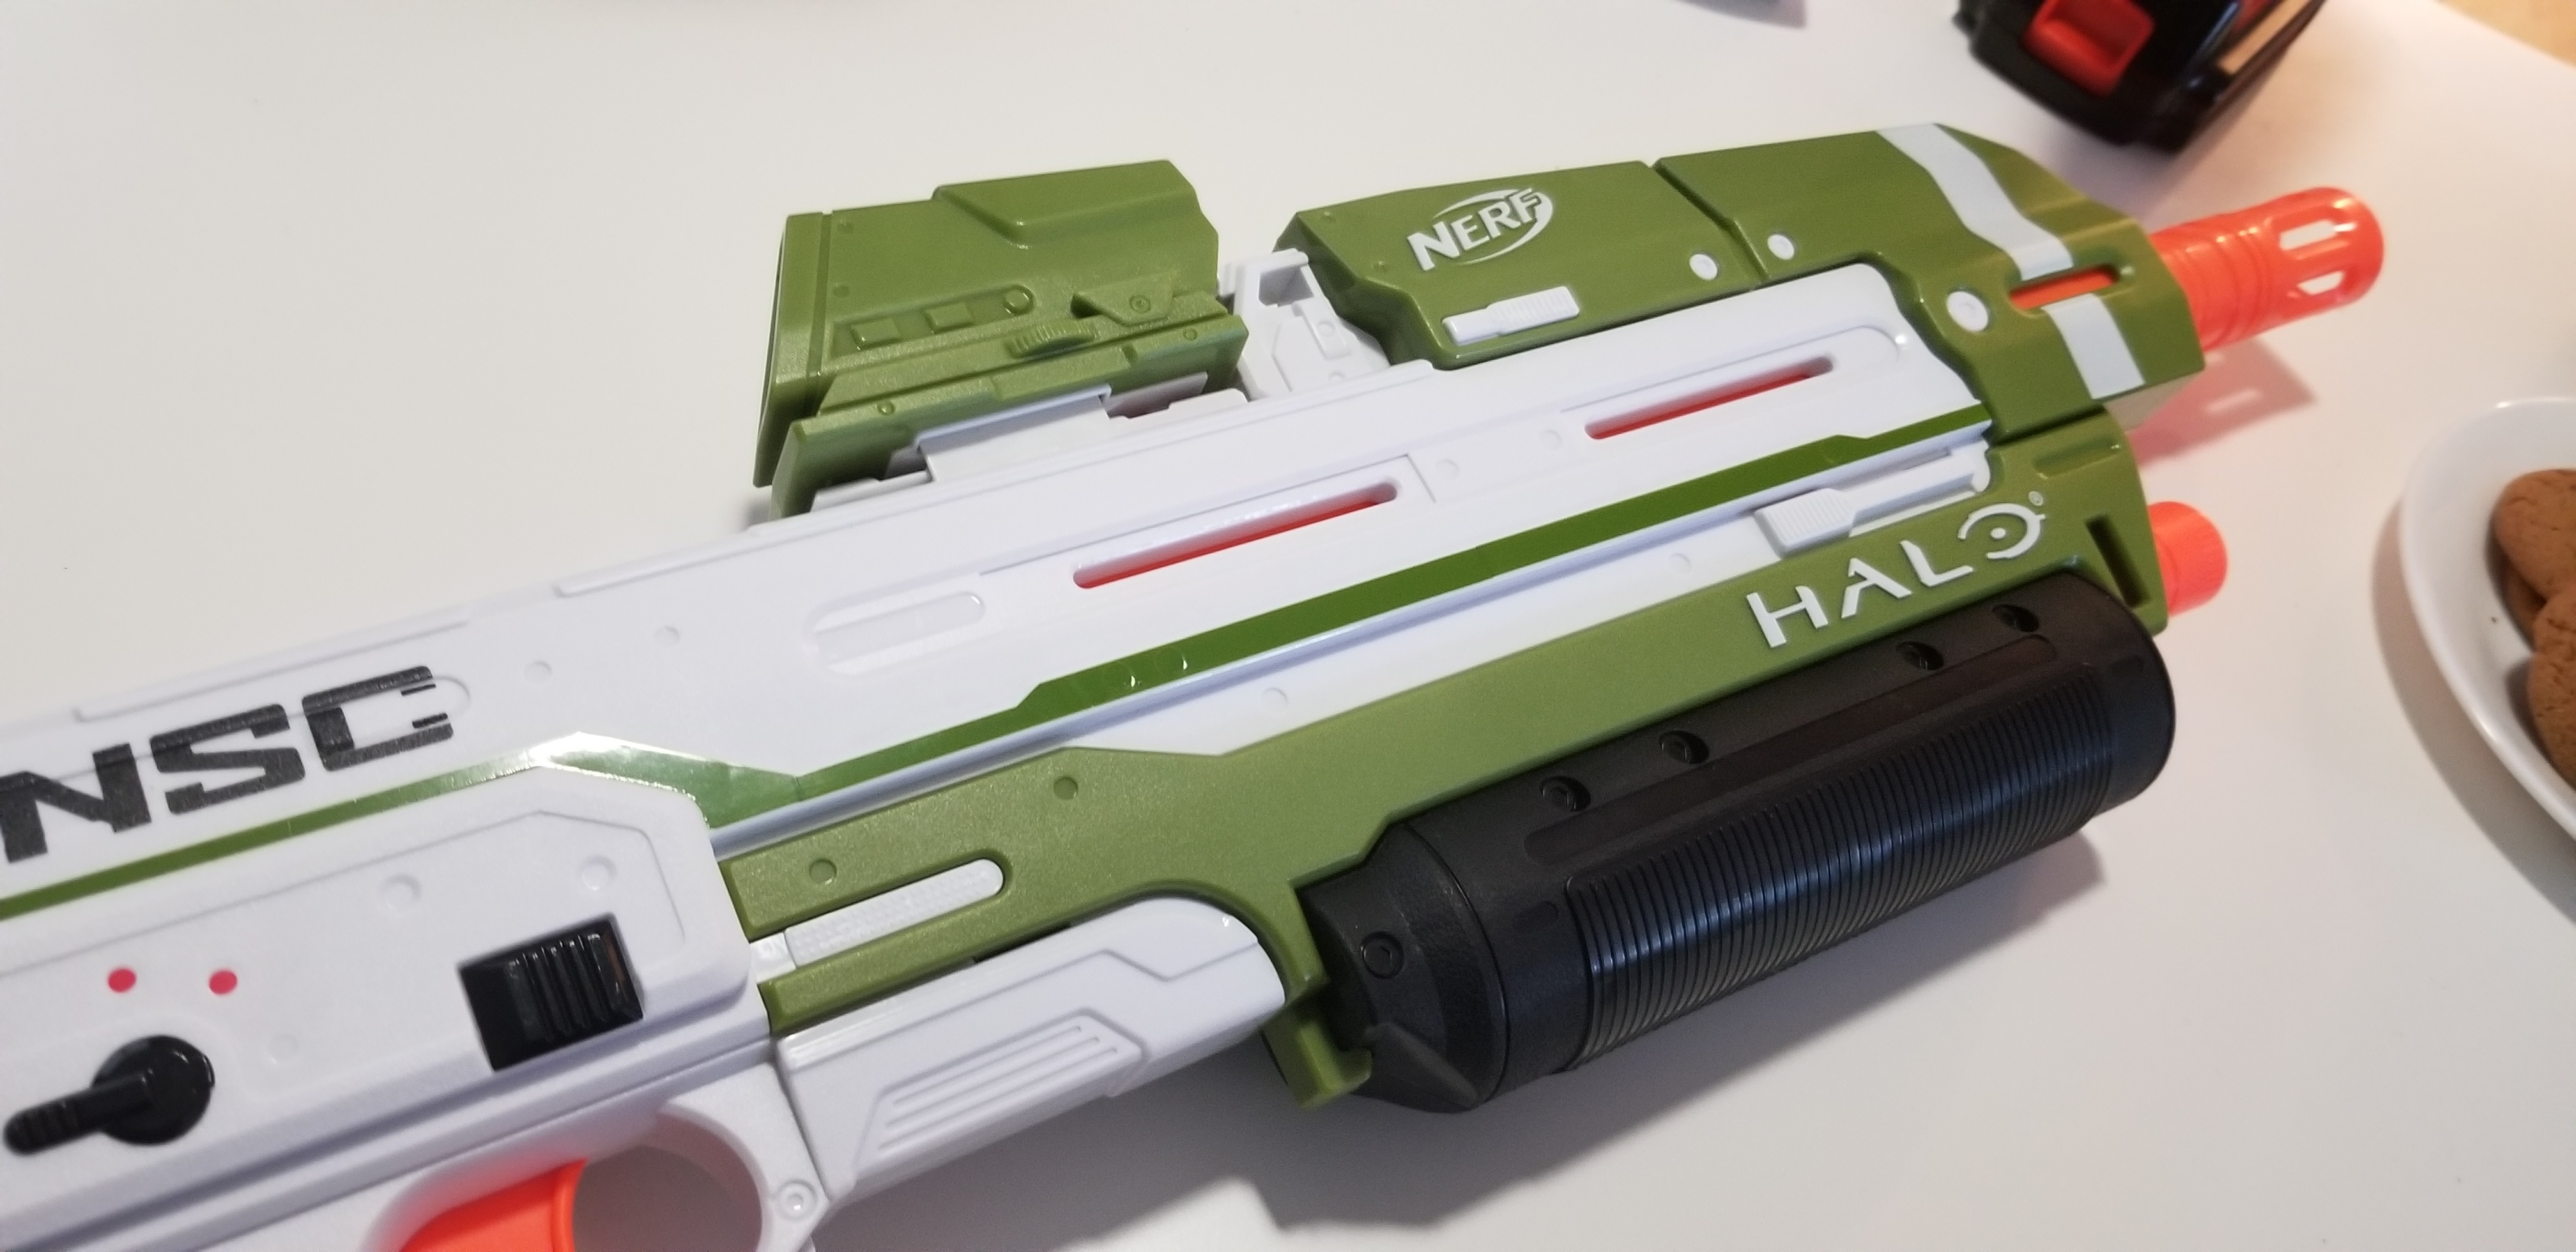 Halo MA40 Blaster Review